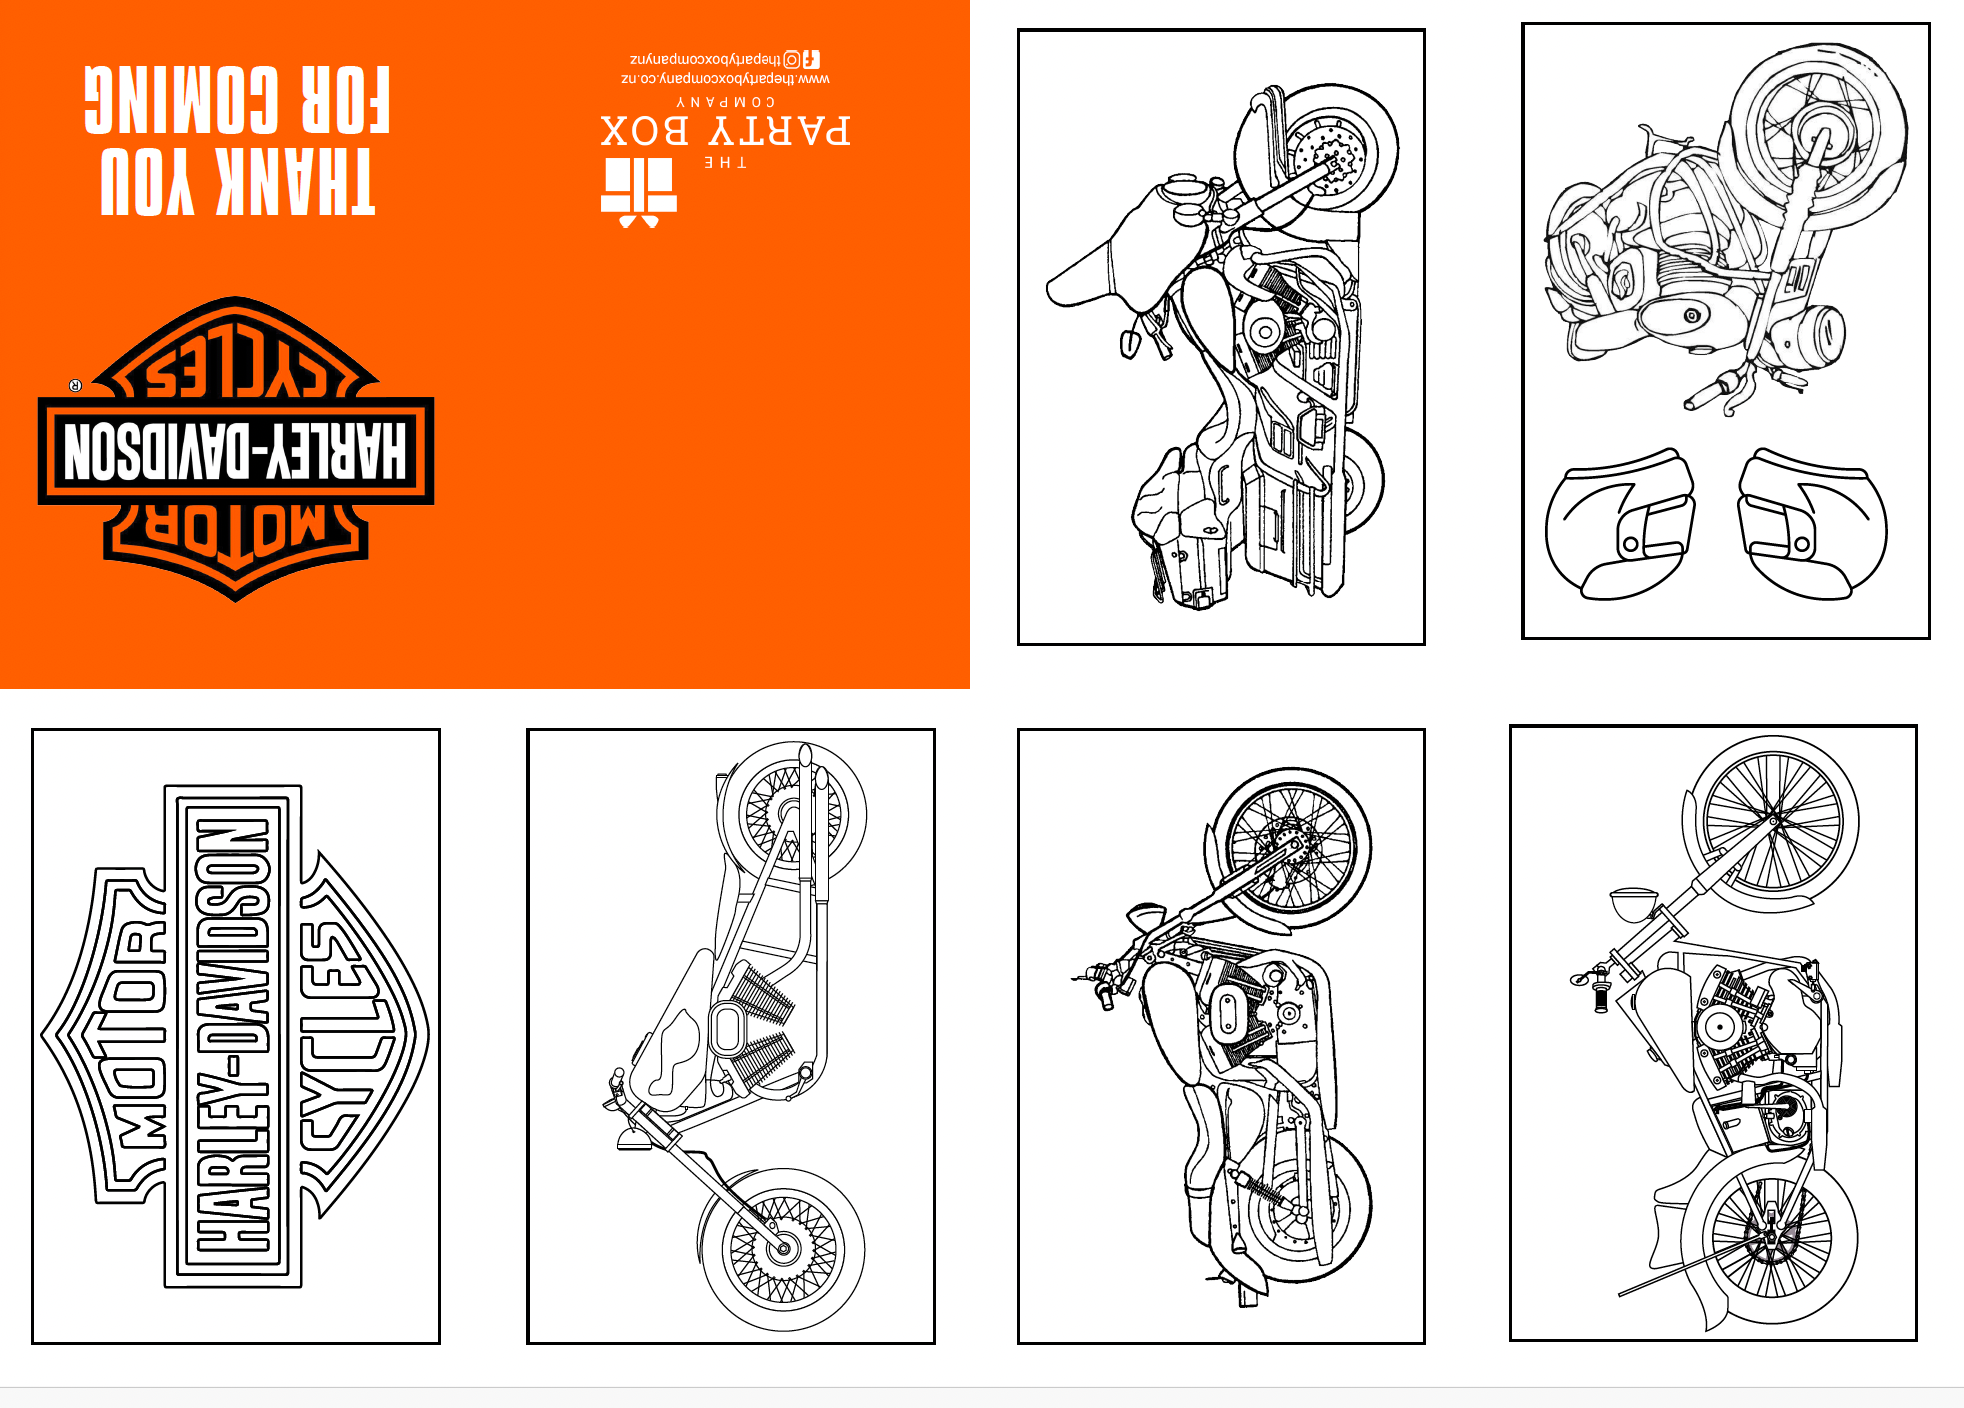 Harley Davidson mini colouring books nz party favours